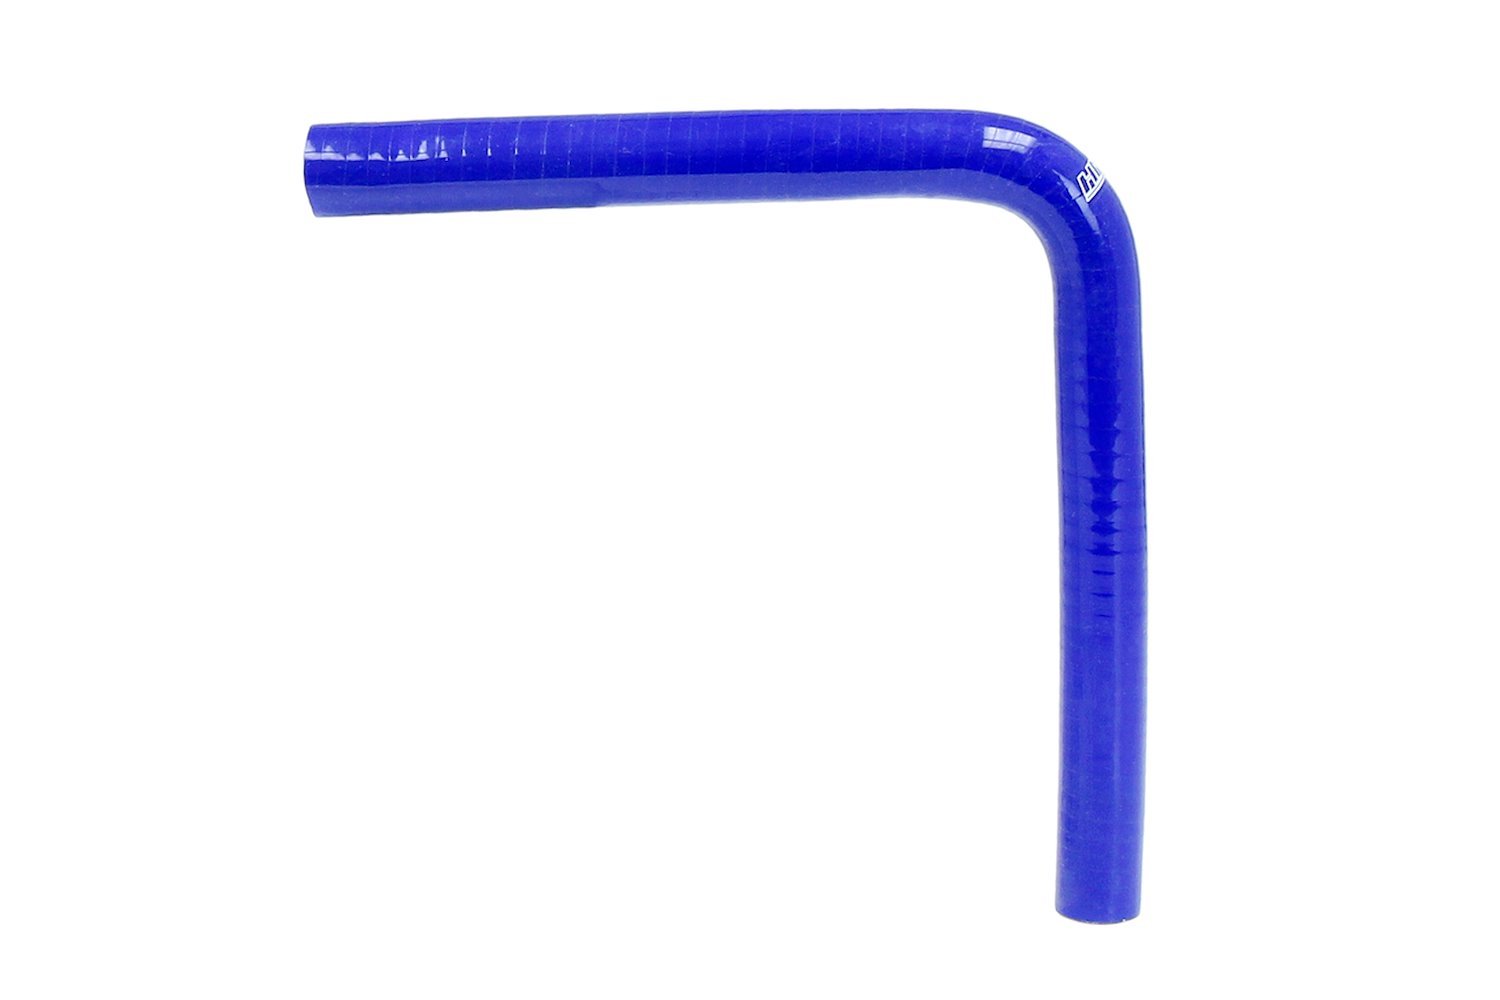 HTSEC90-138-BLUE Silicone 90-Degree Elbow Coupler Hose, High-Temp 4-Ply Reinforced, 1-3/8 in. ID, Blue